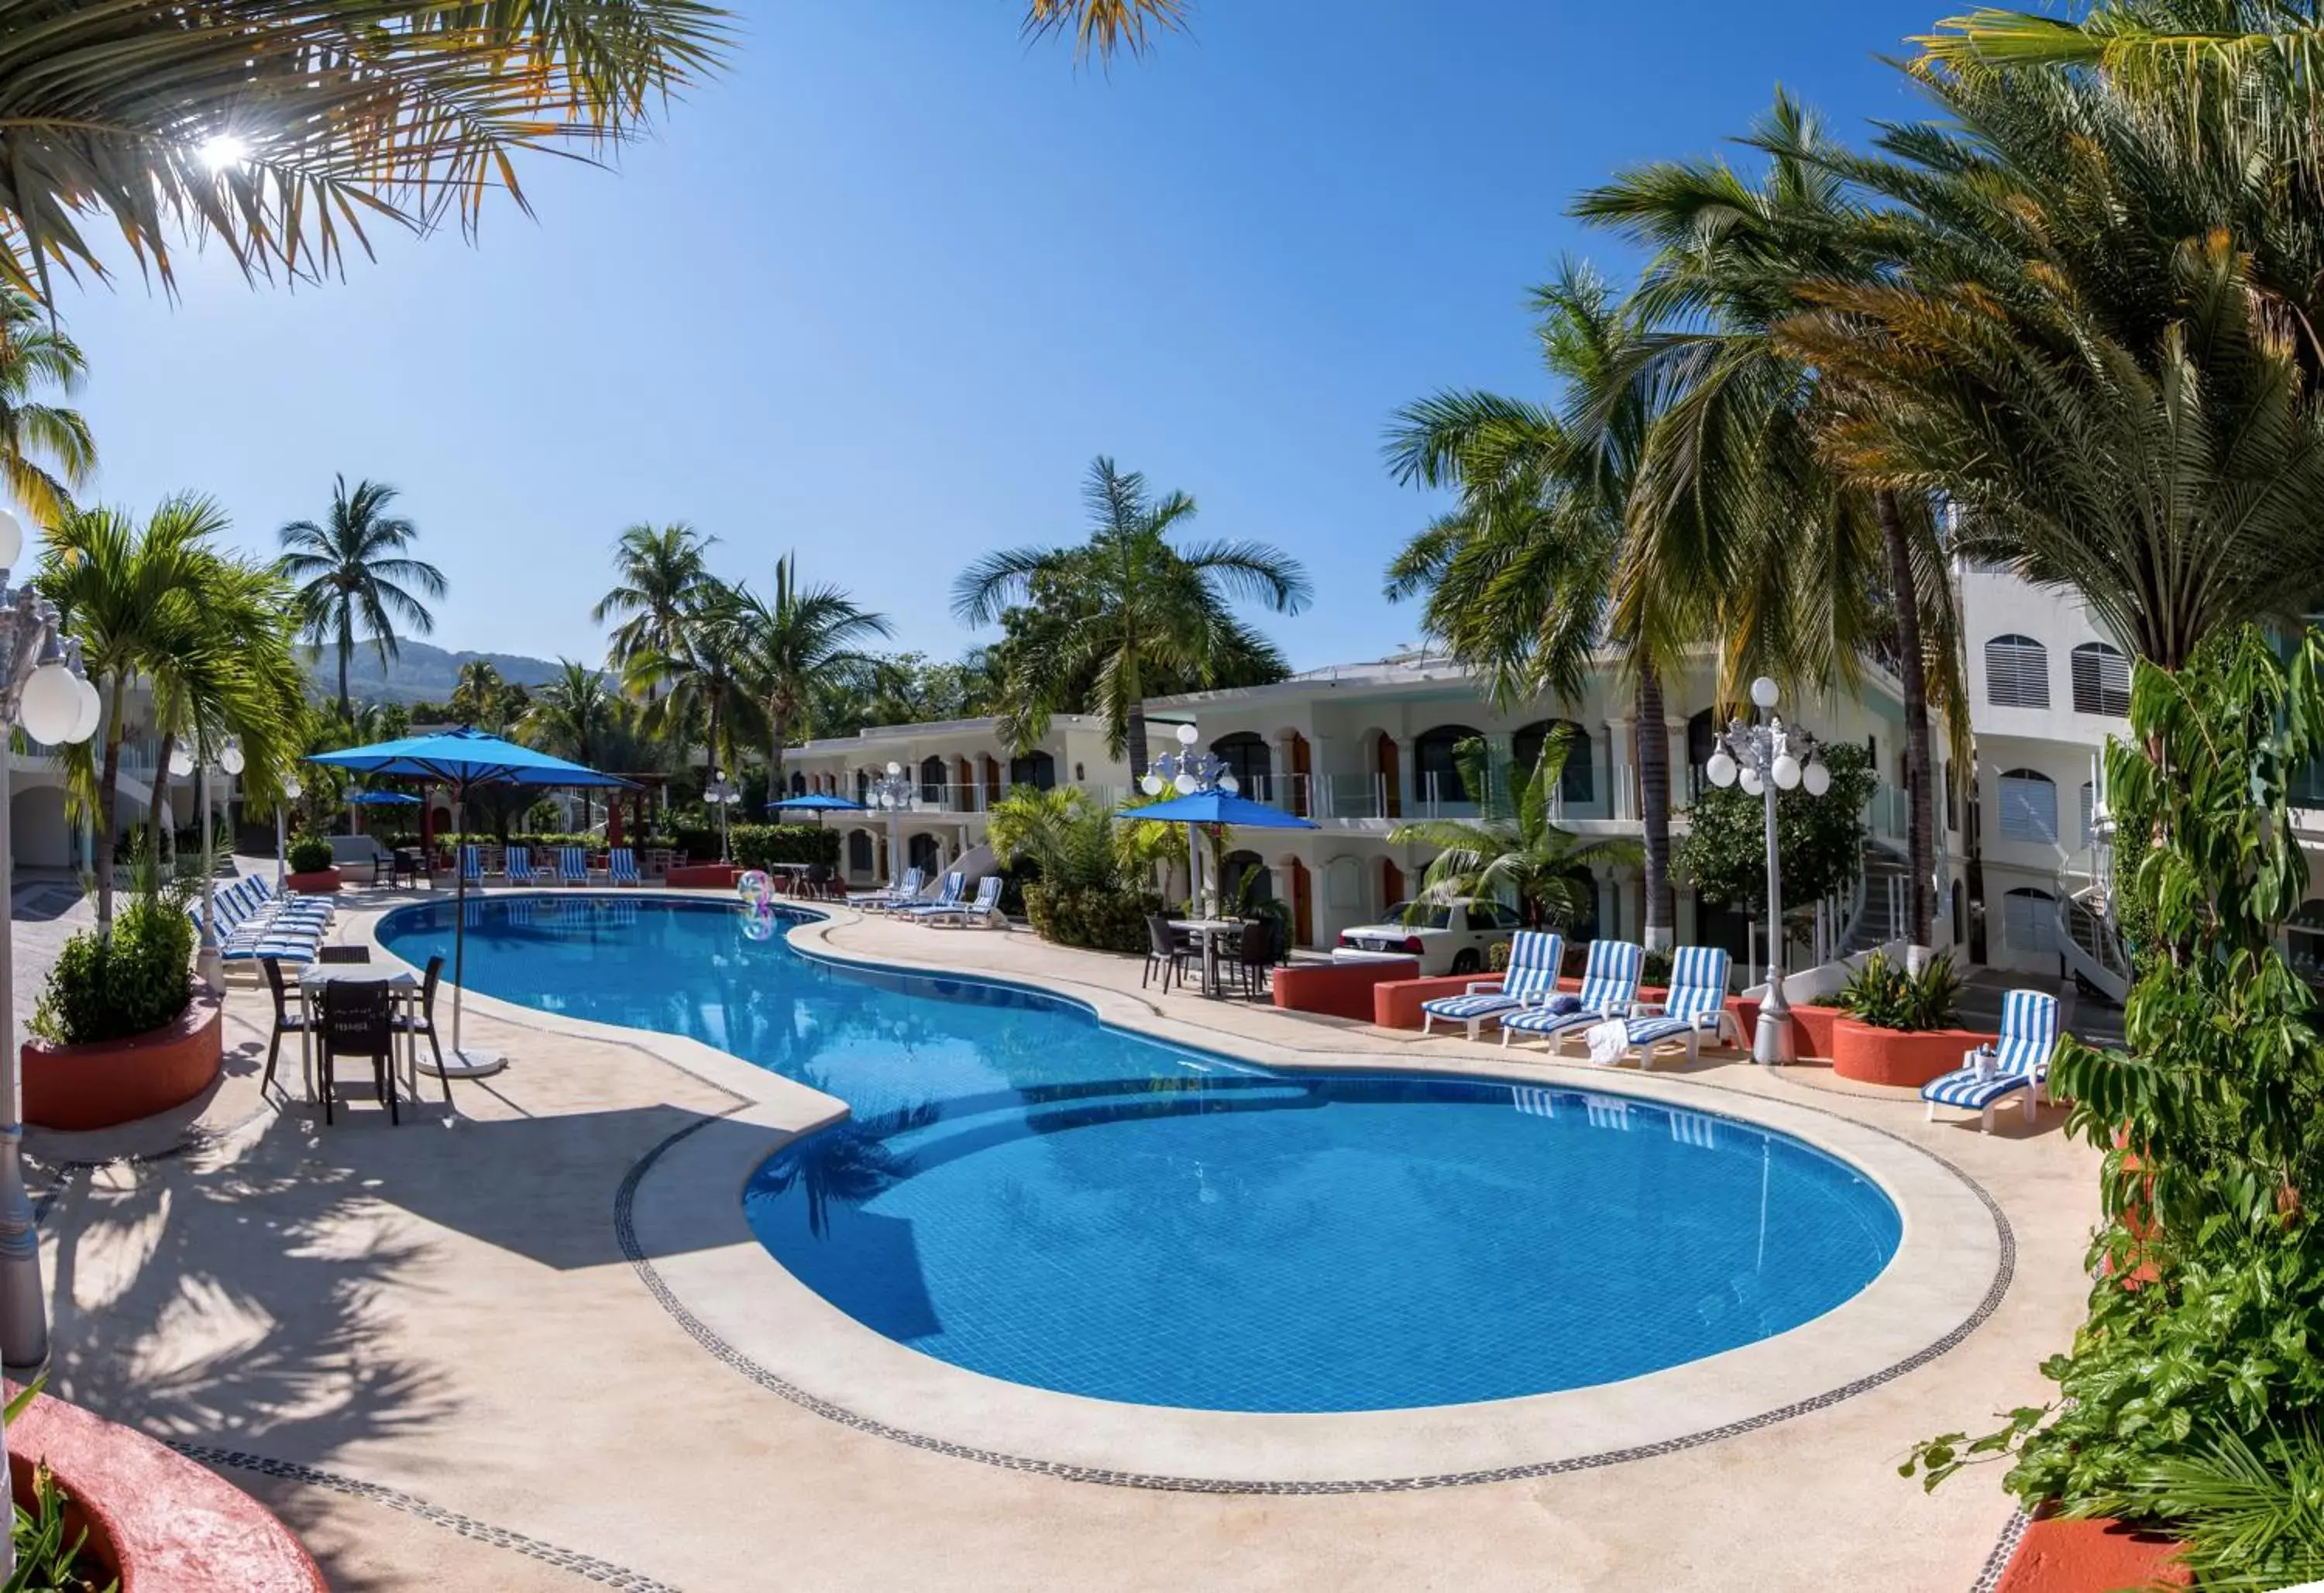 Property building, Swimming Pool in Hotel Costa Azul